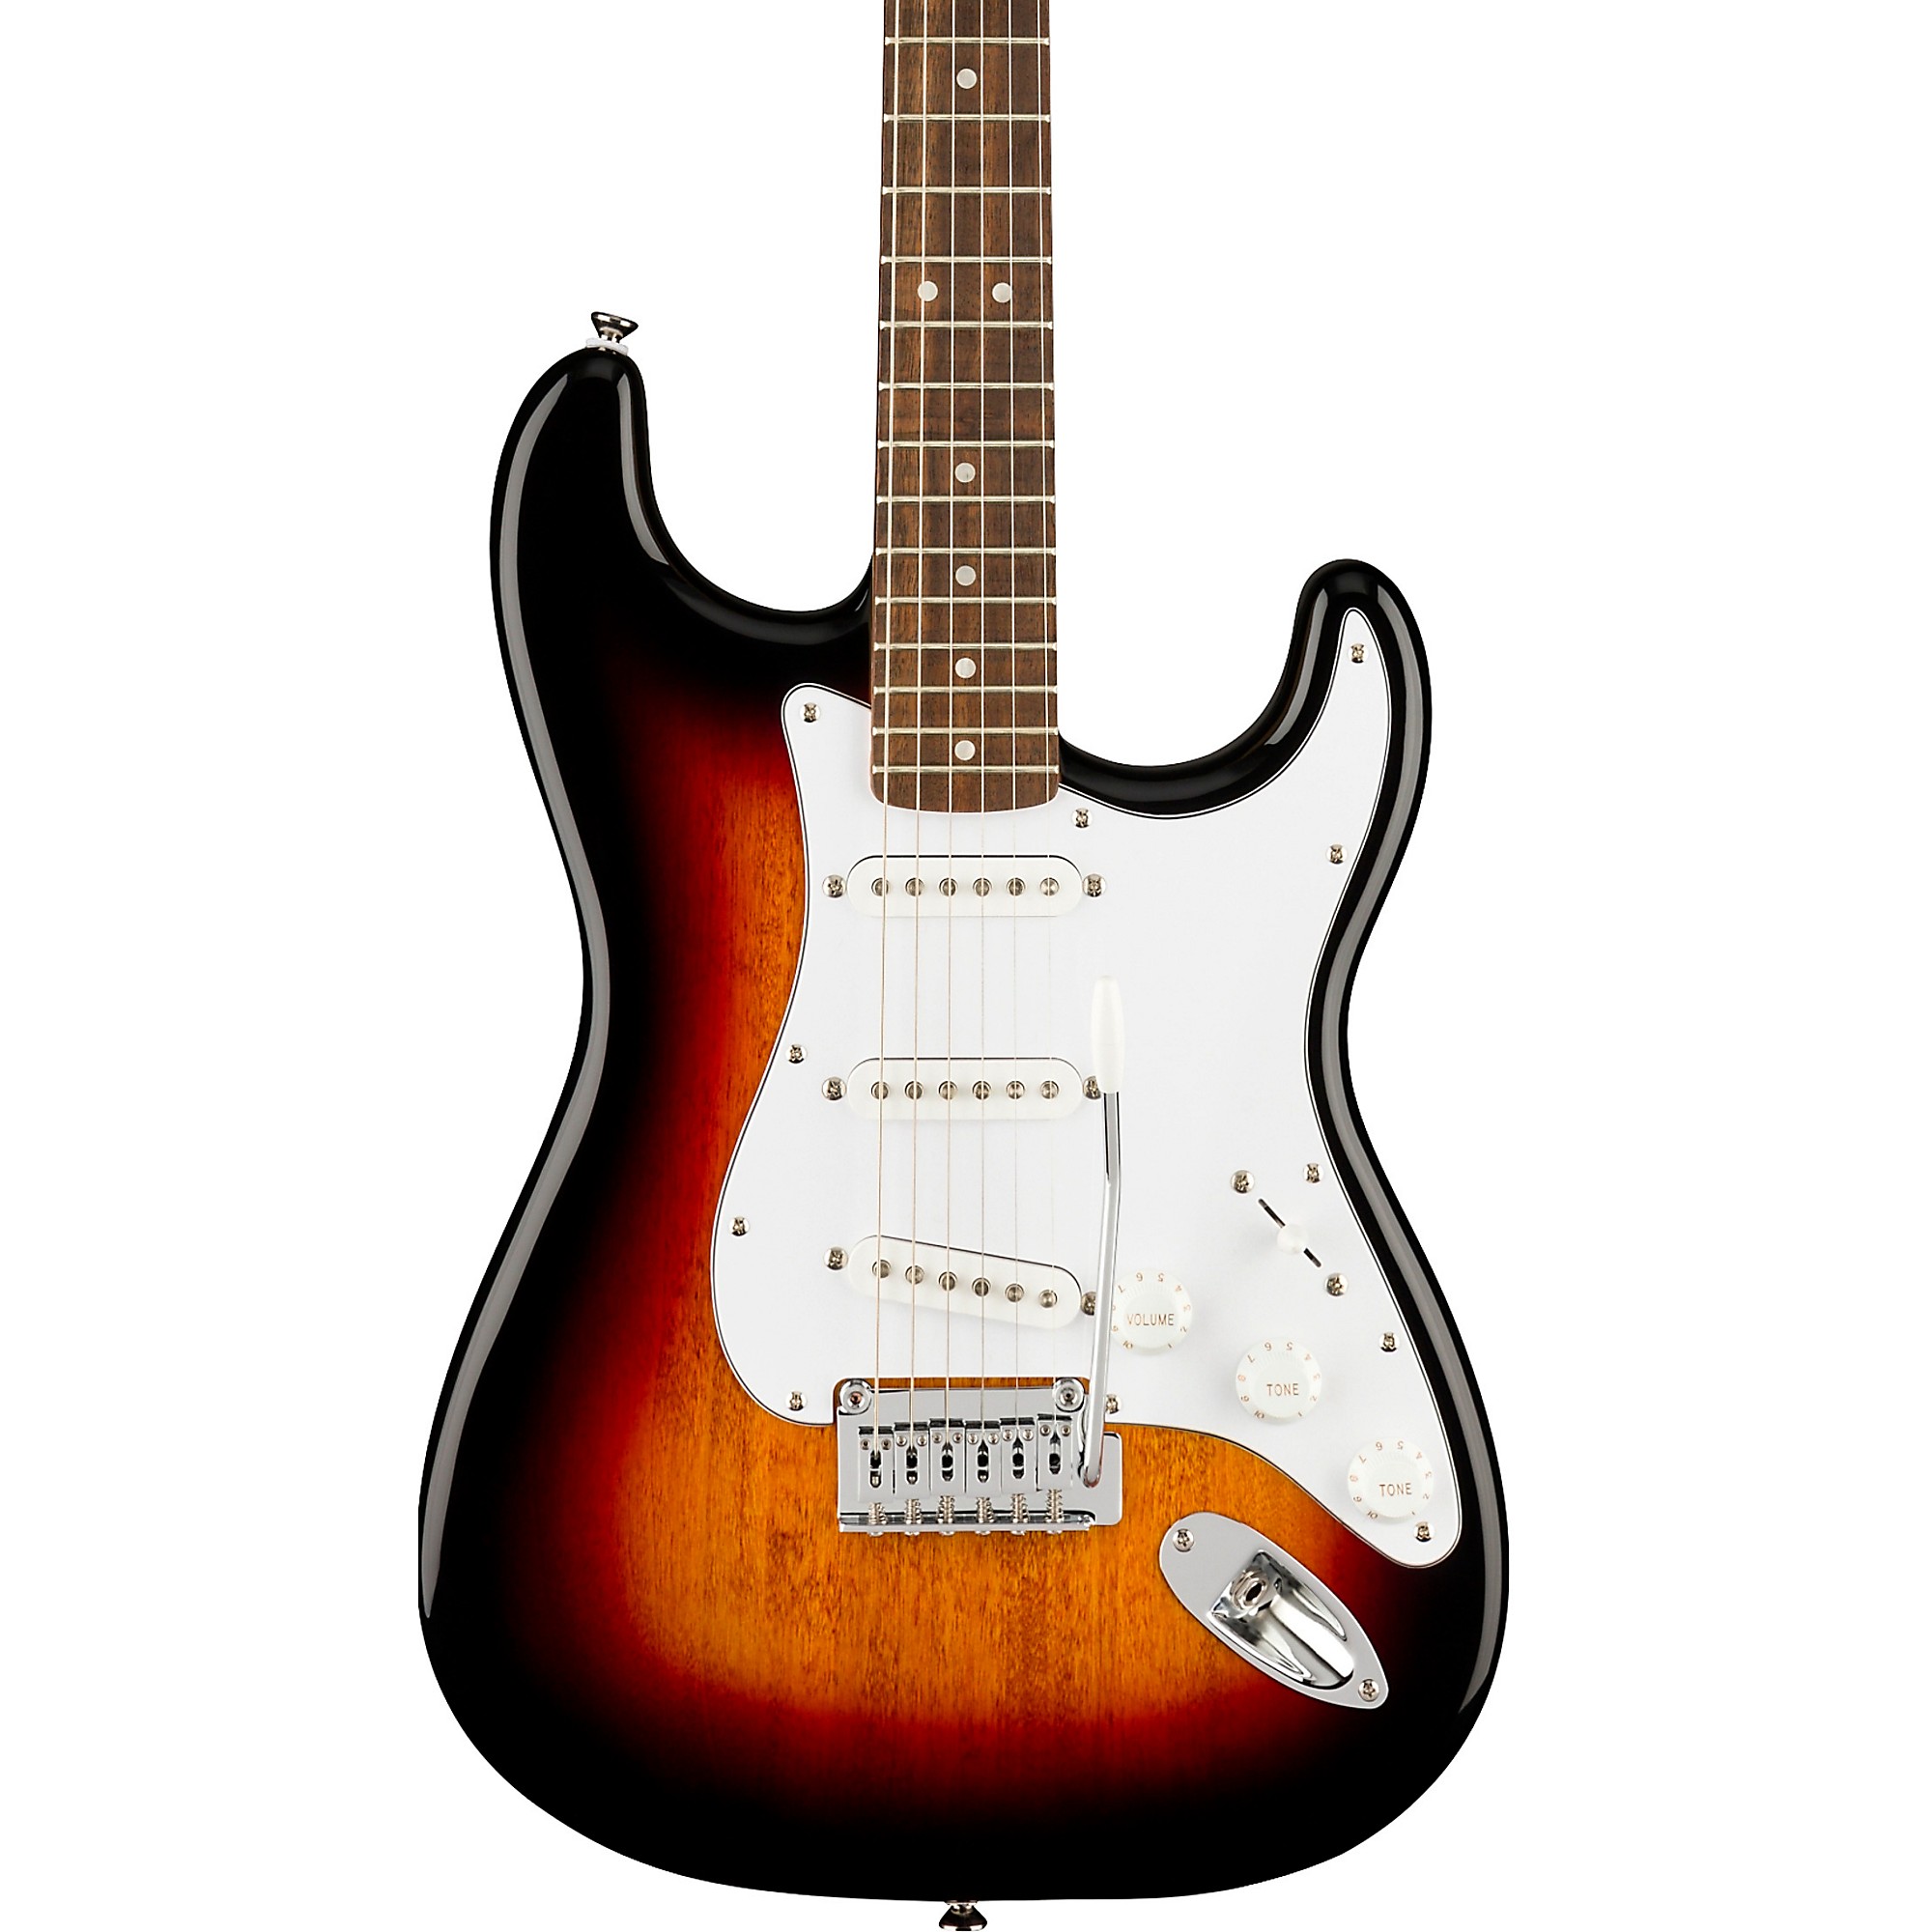 Squier Affinity Series Stratocaster Electric Guitar 3-Color